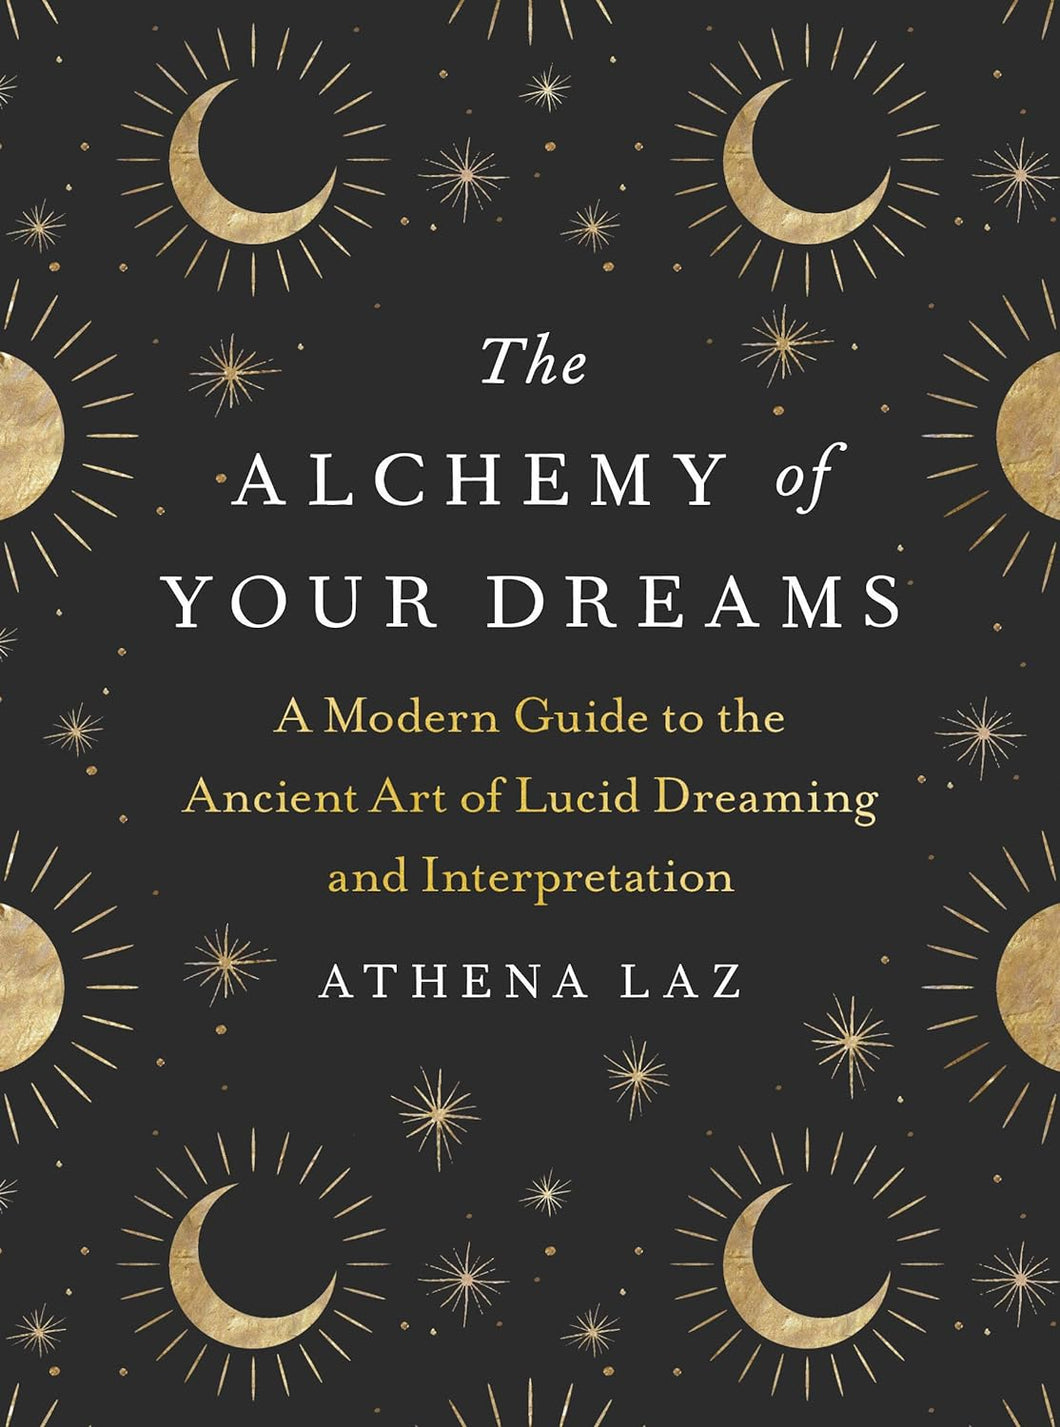 The Alchemy of Your Dreams: A Modern Guide to the Ancient Art of Lucid Dreaming and Interpretation